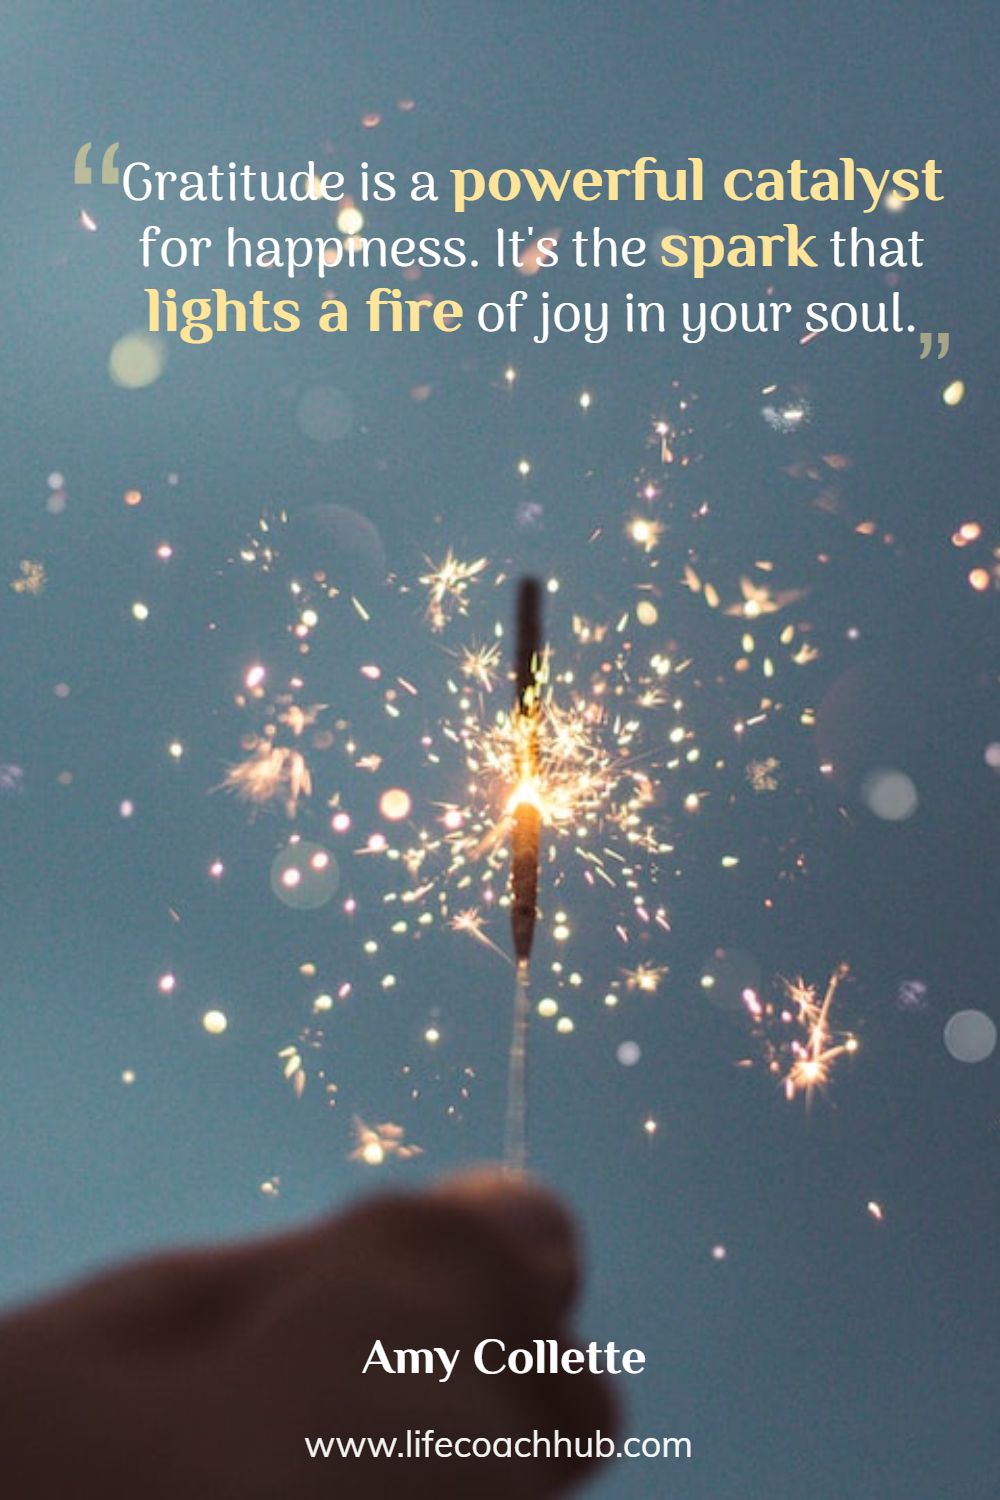 Gratitude is a powerful catalyst for happiness. It's the spark that lights a fire of joy in your soul. Amy Collette Coaching Quote